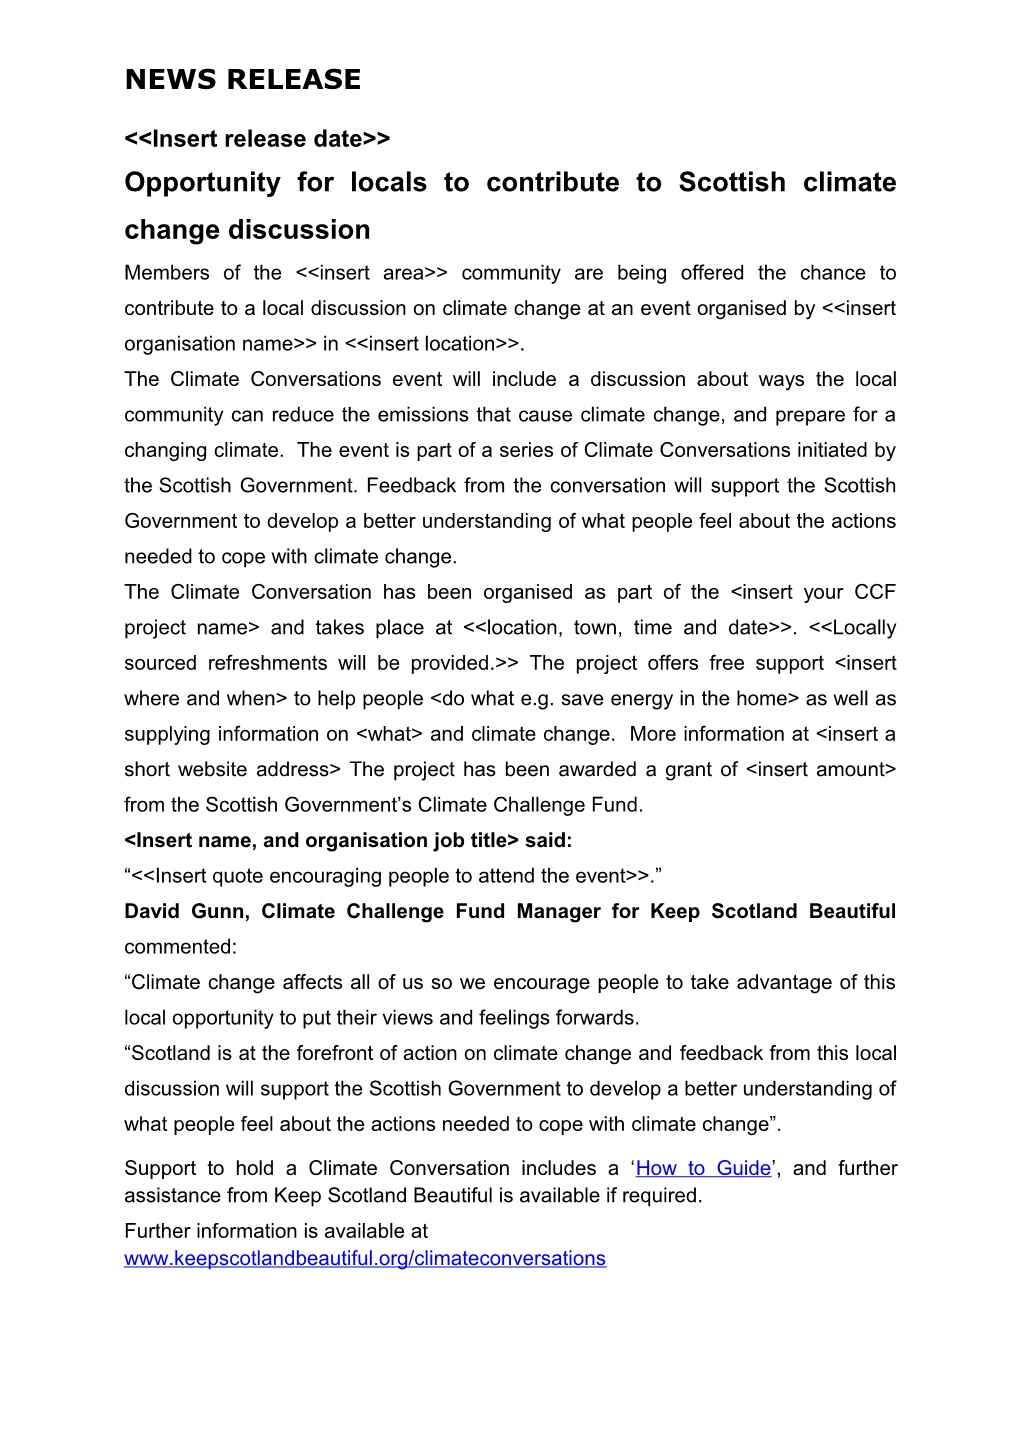 Opportunity for Locals to Contribute to Scottish Climate Change Discussion